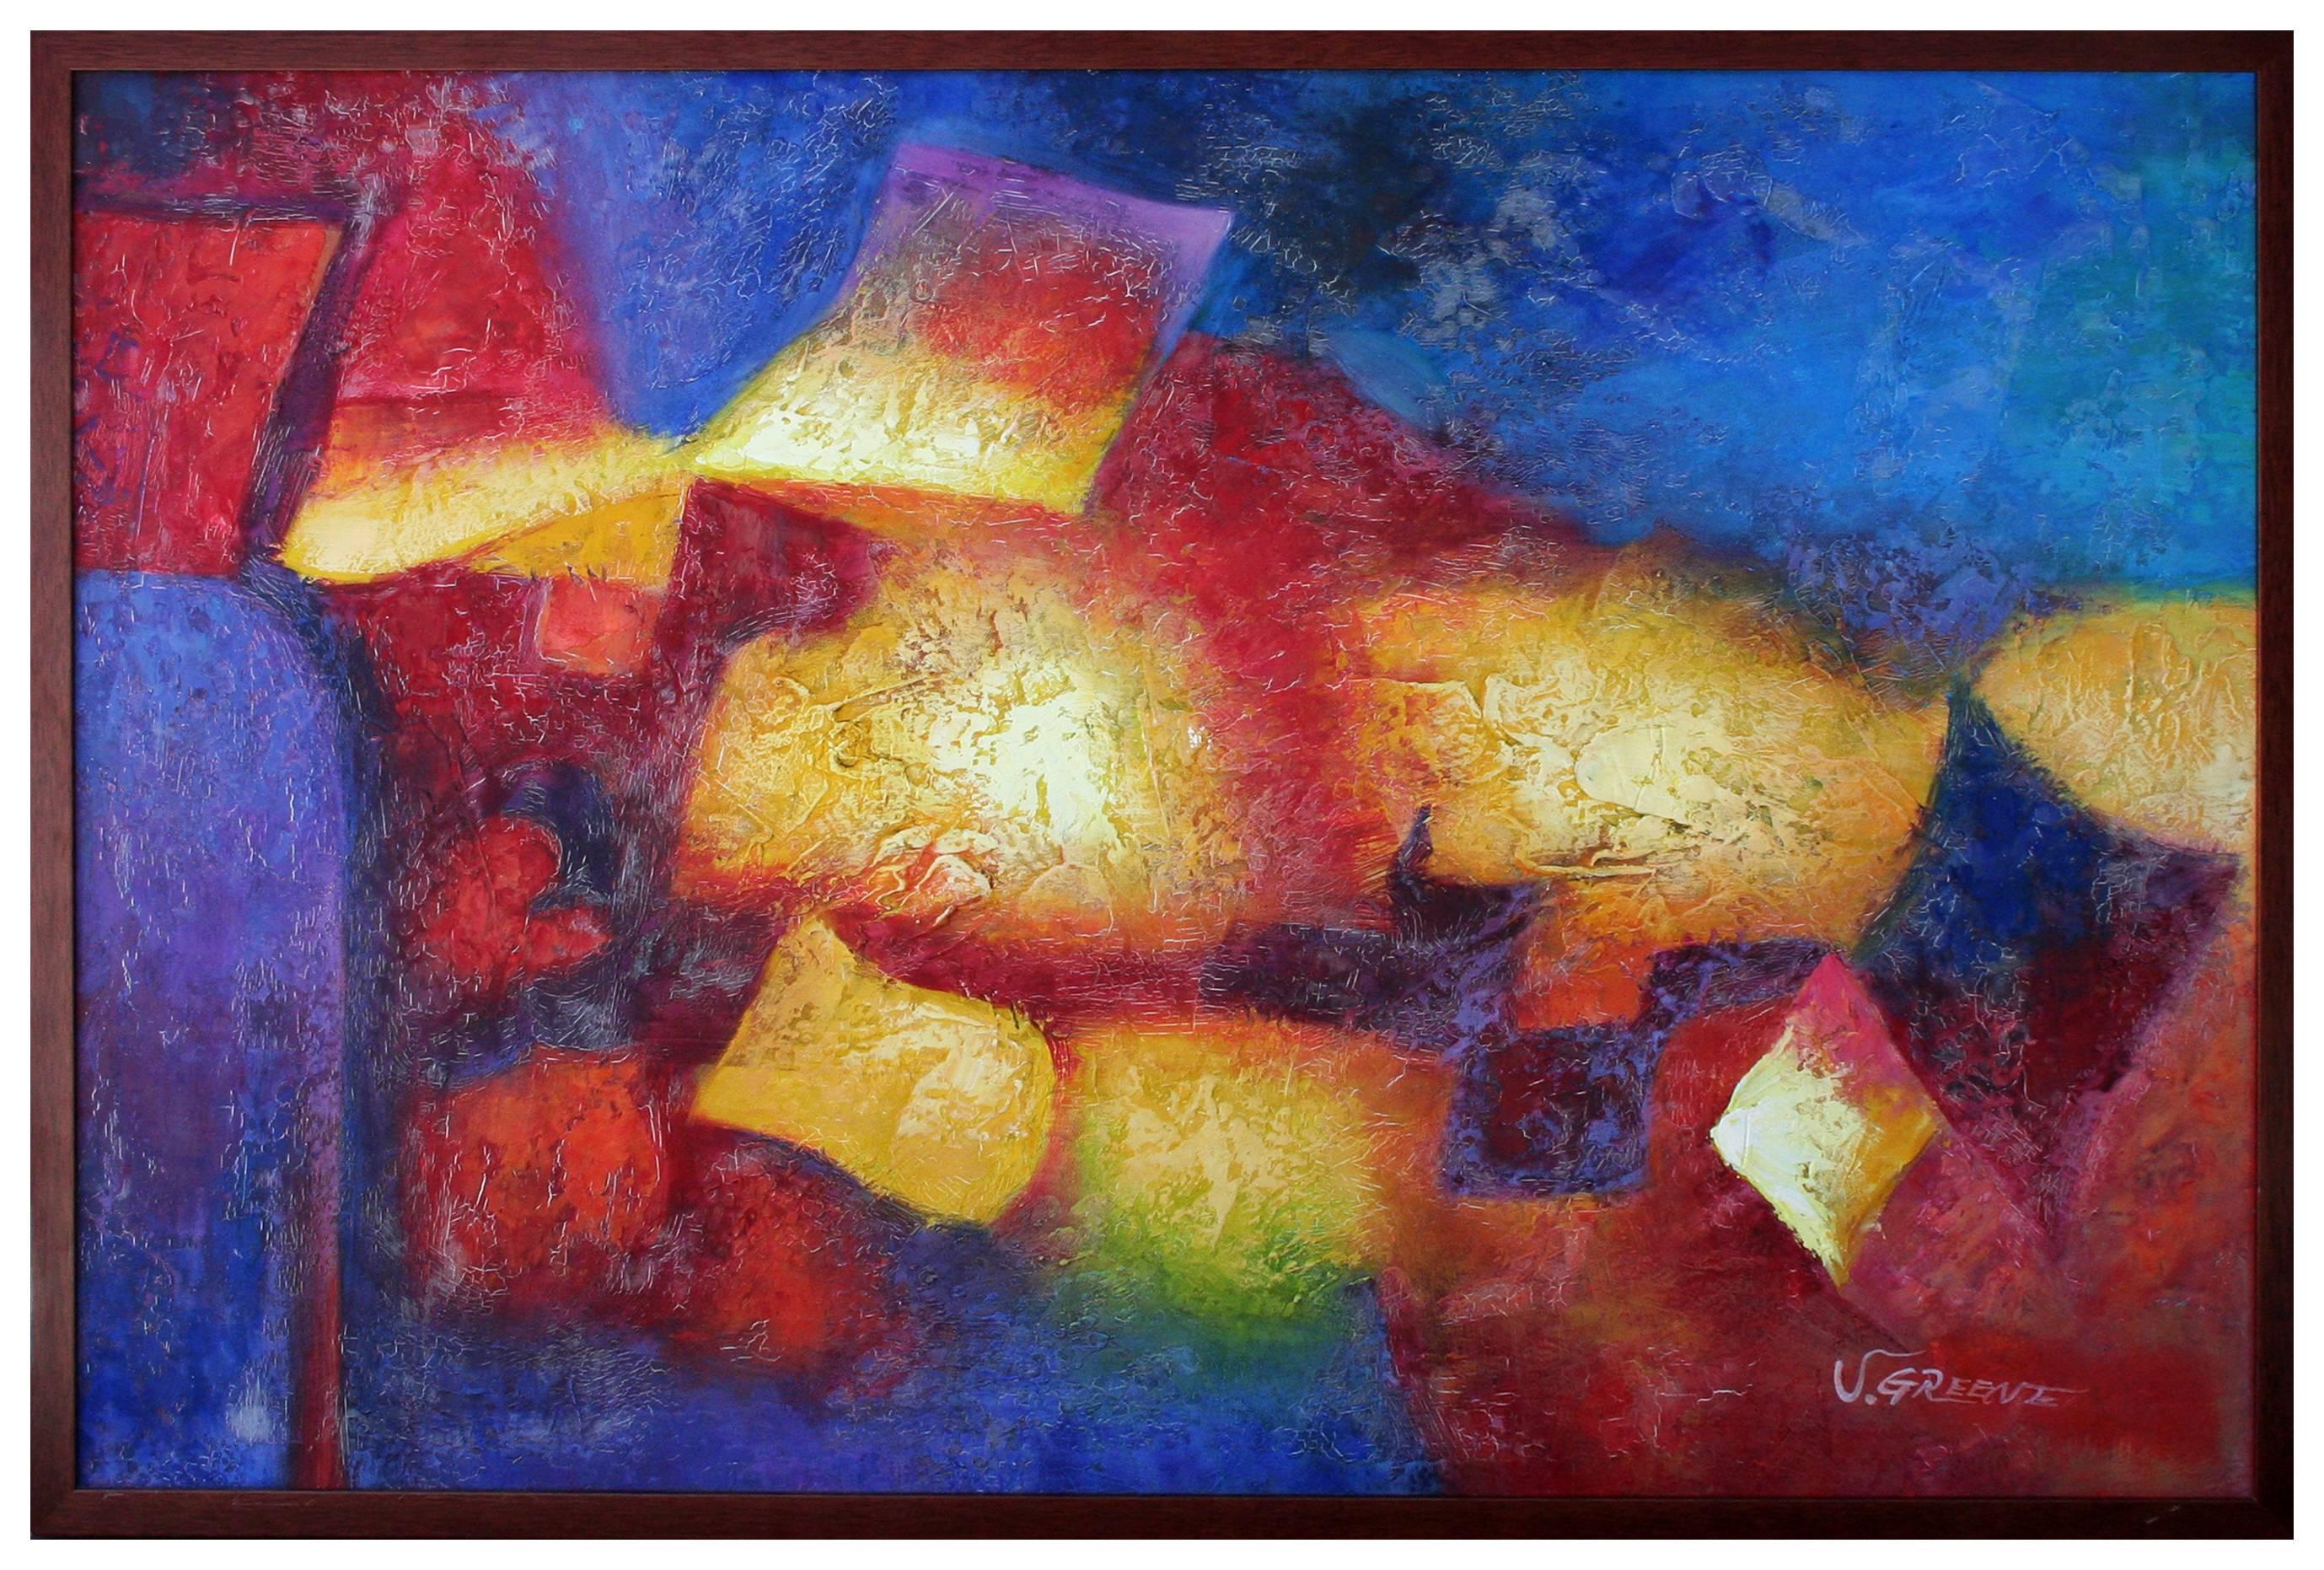 Red and Blue Abstract - Original Oil On Canvas